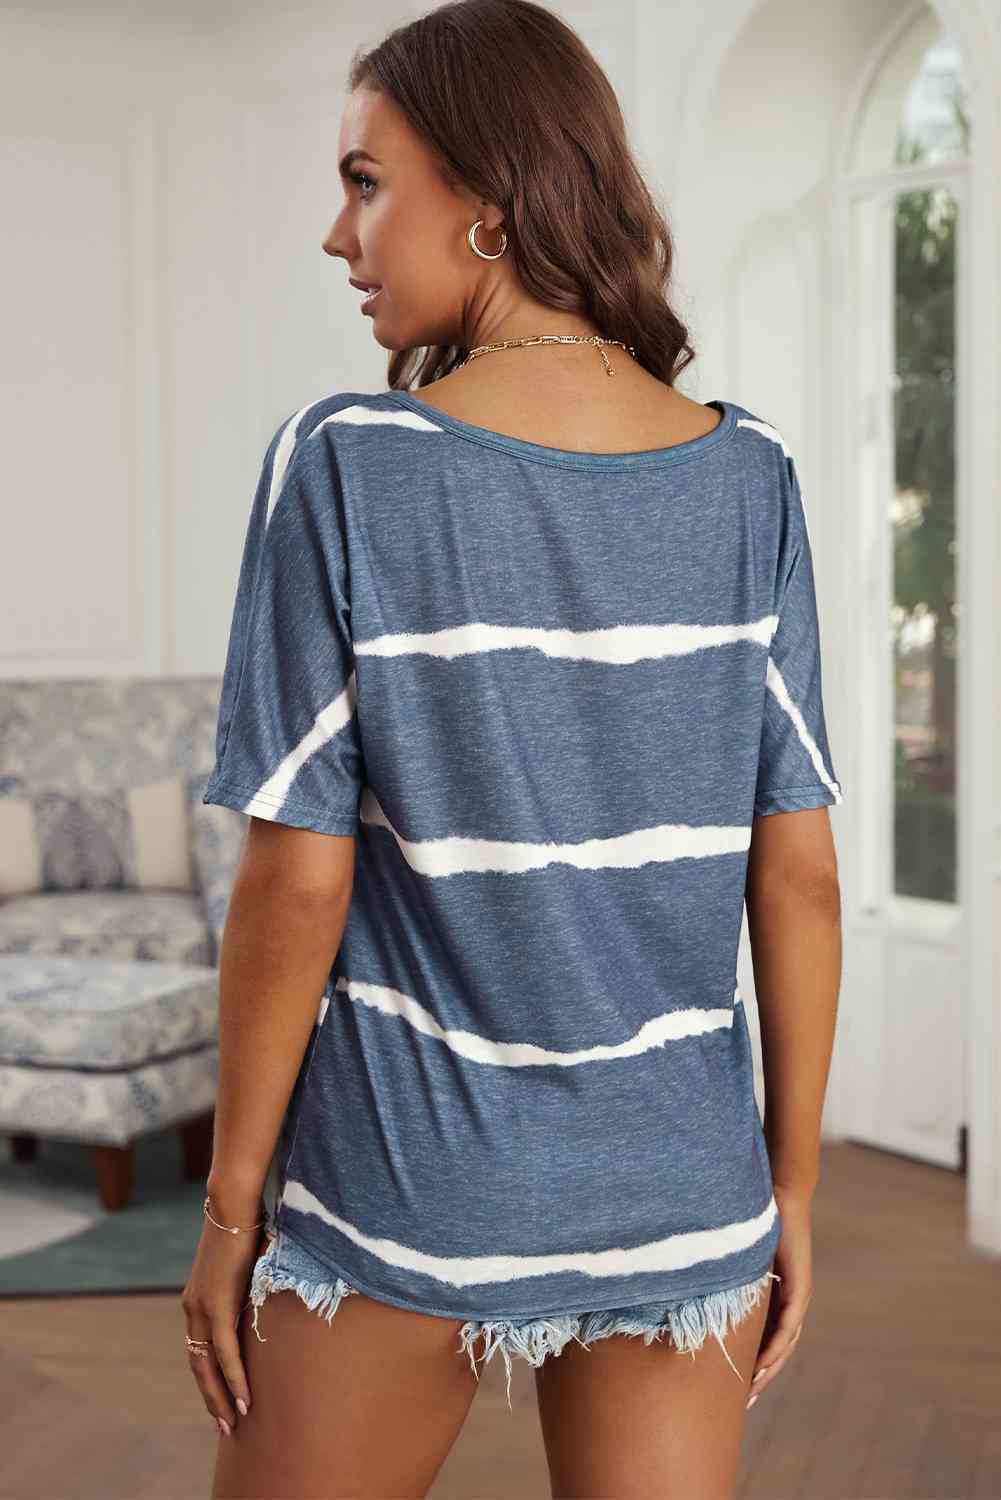 Striped Tie Front Tee Shirt - Shop Tophatter Deals, Electronics, Fashion, Jewelry, Health, Beauty, Home Decor, Free Shipping